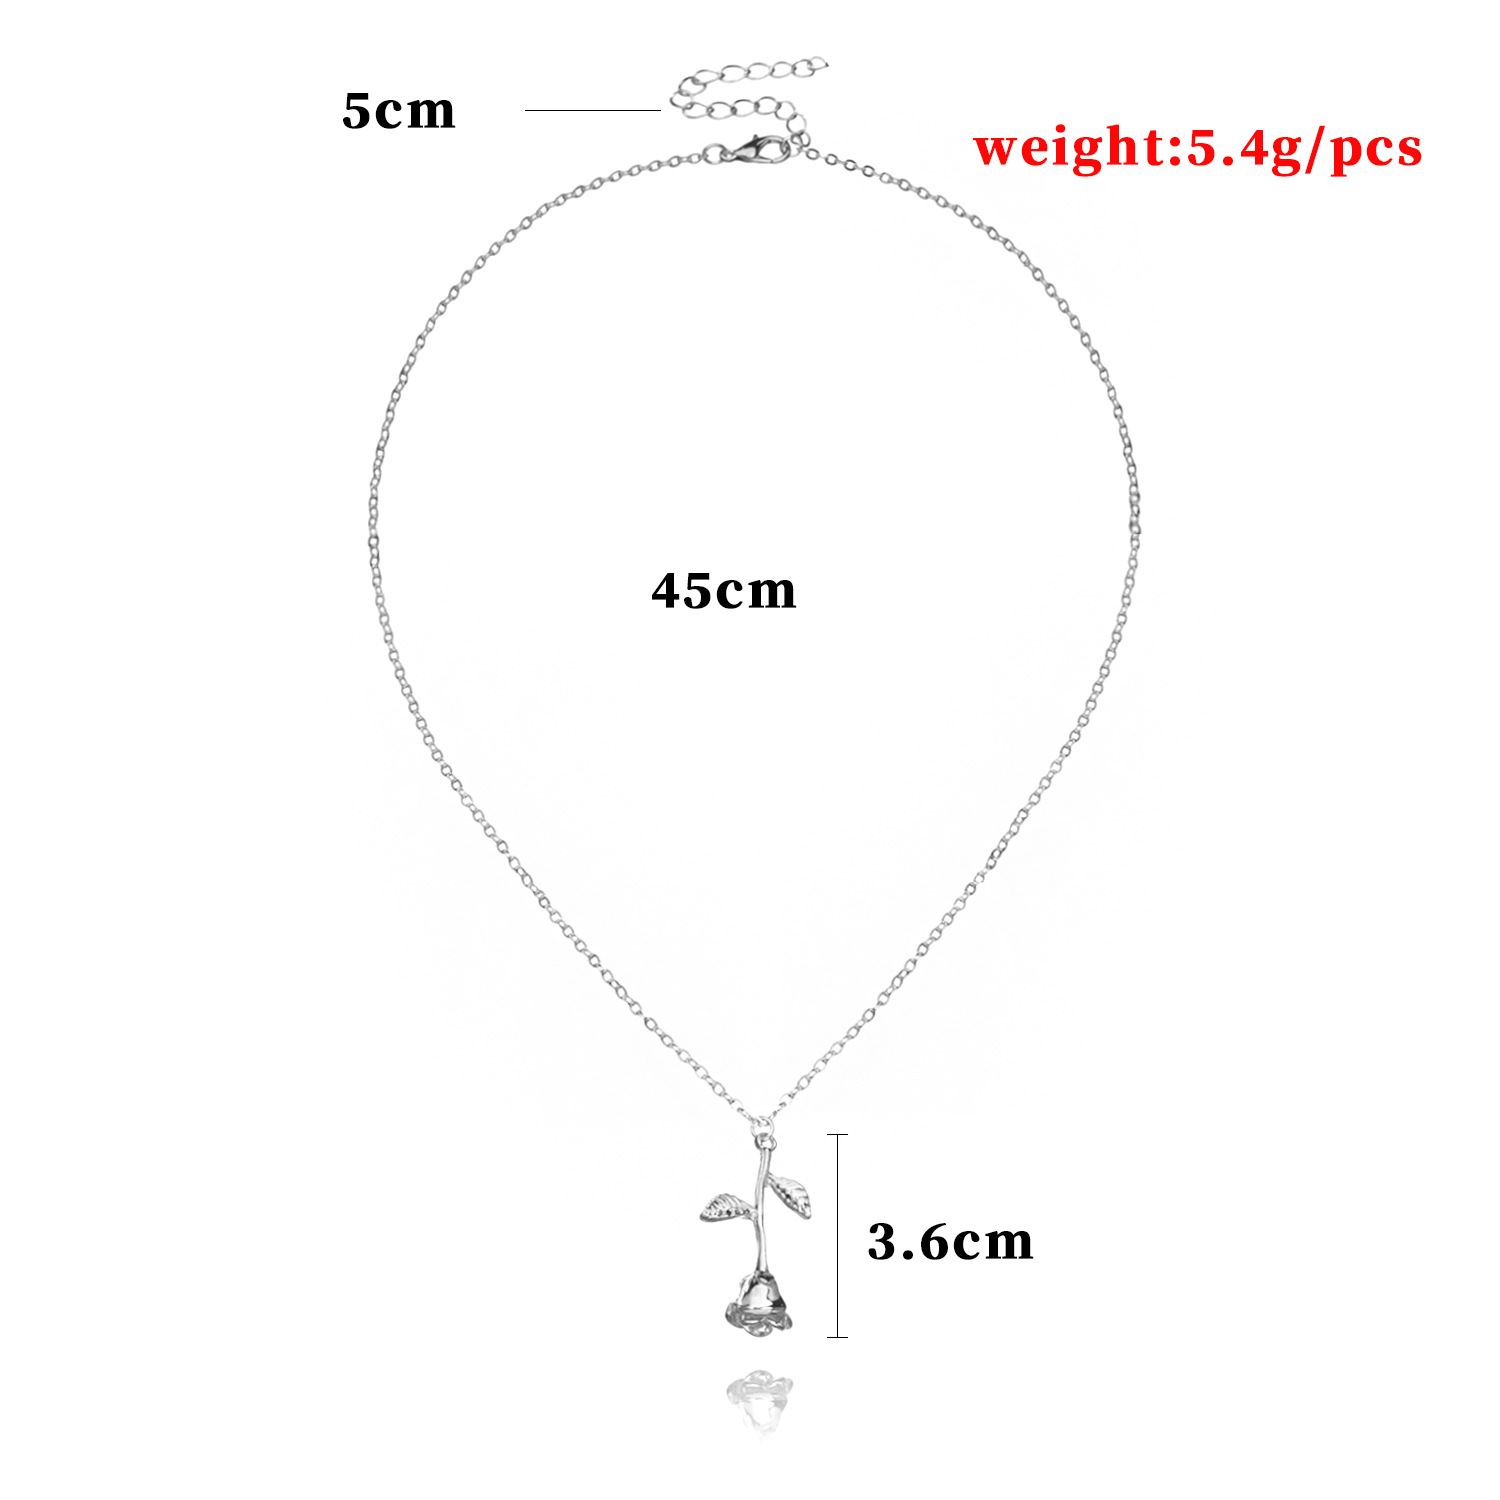 Europe and America Cross Border New Accessories Exquisite Rose Pendant Necklace for Girlfriend Valentine's Day Gift Wholesale